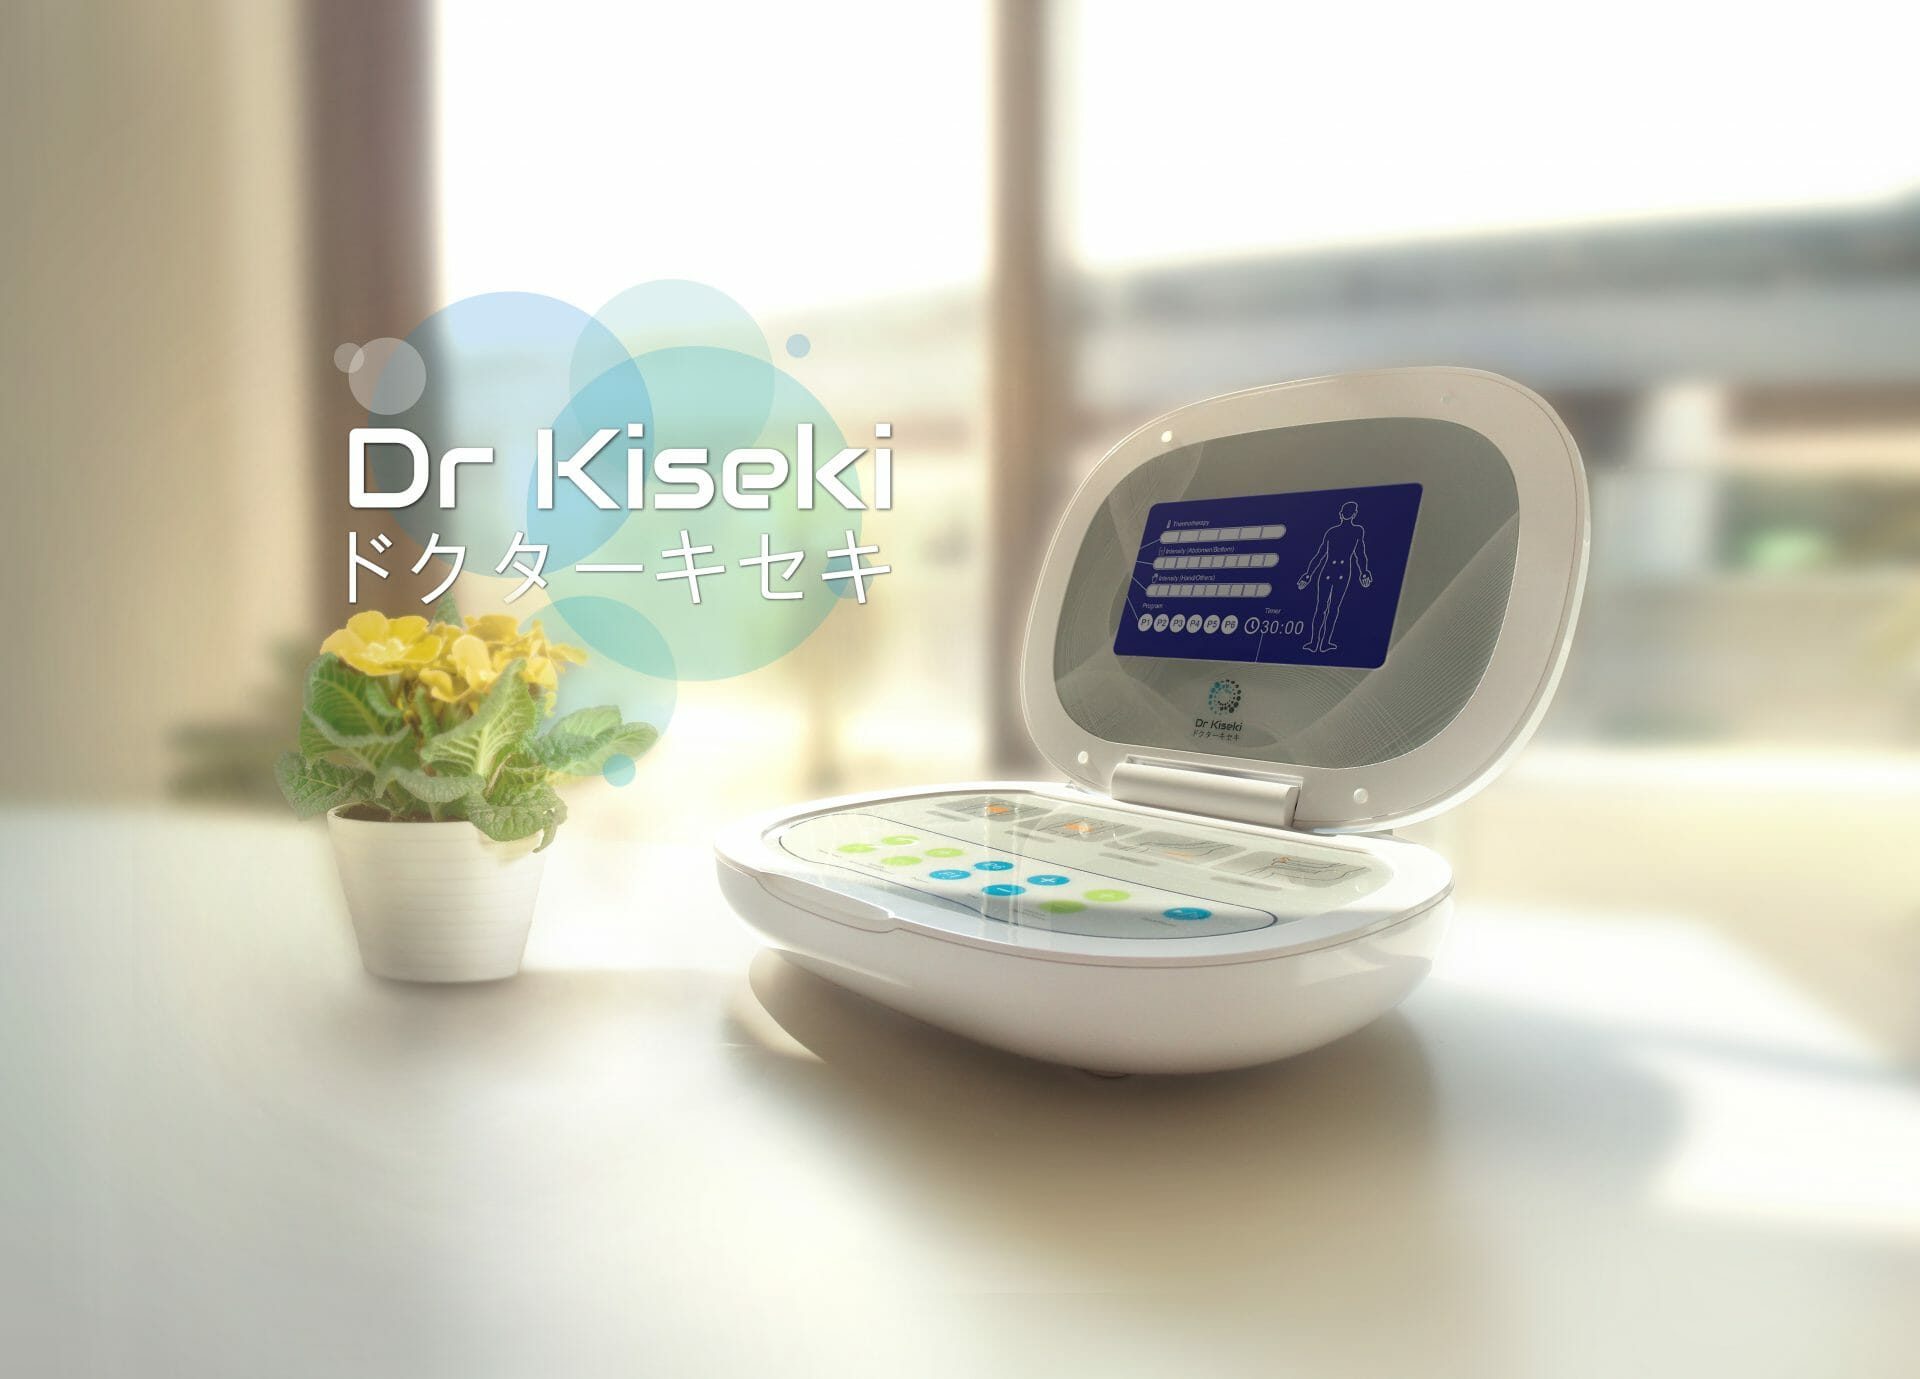 Dr Kiseki, the revolutionary home use medical device designed for stroke rehabilitation and recovery. Using physiotherapy technology and TCM methodology, Dr. Kiseki can help improve mobility, strength, and overall wellbeing after a stroke